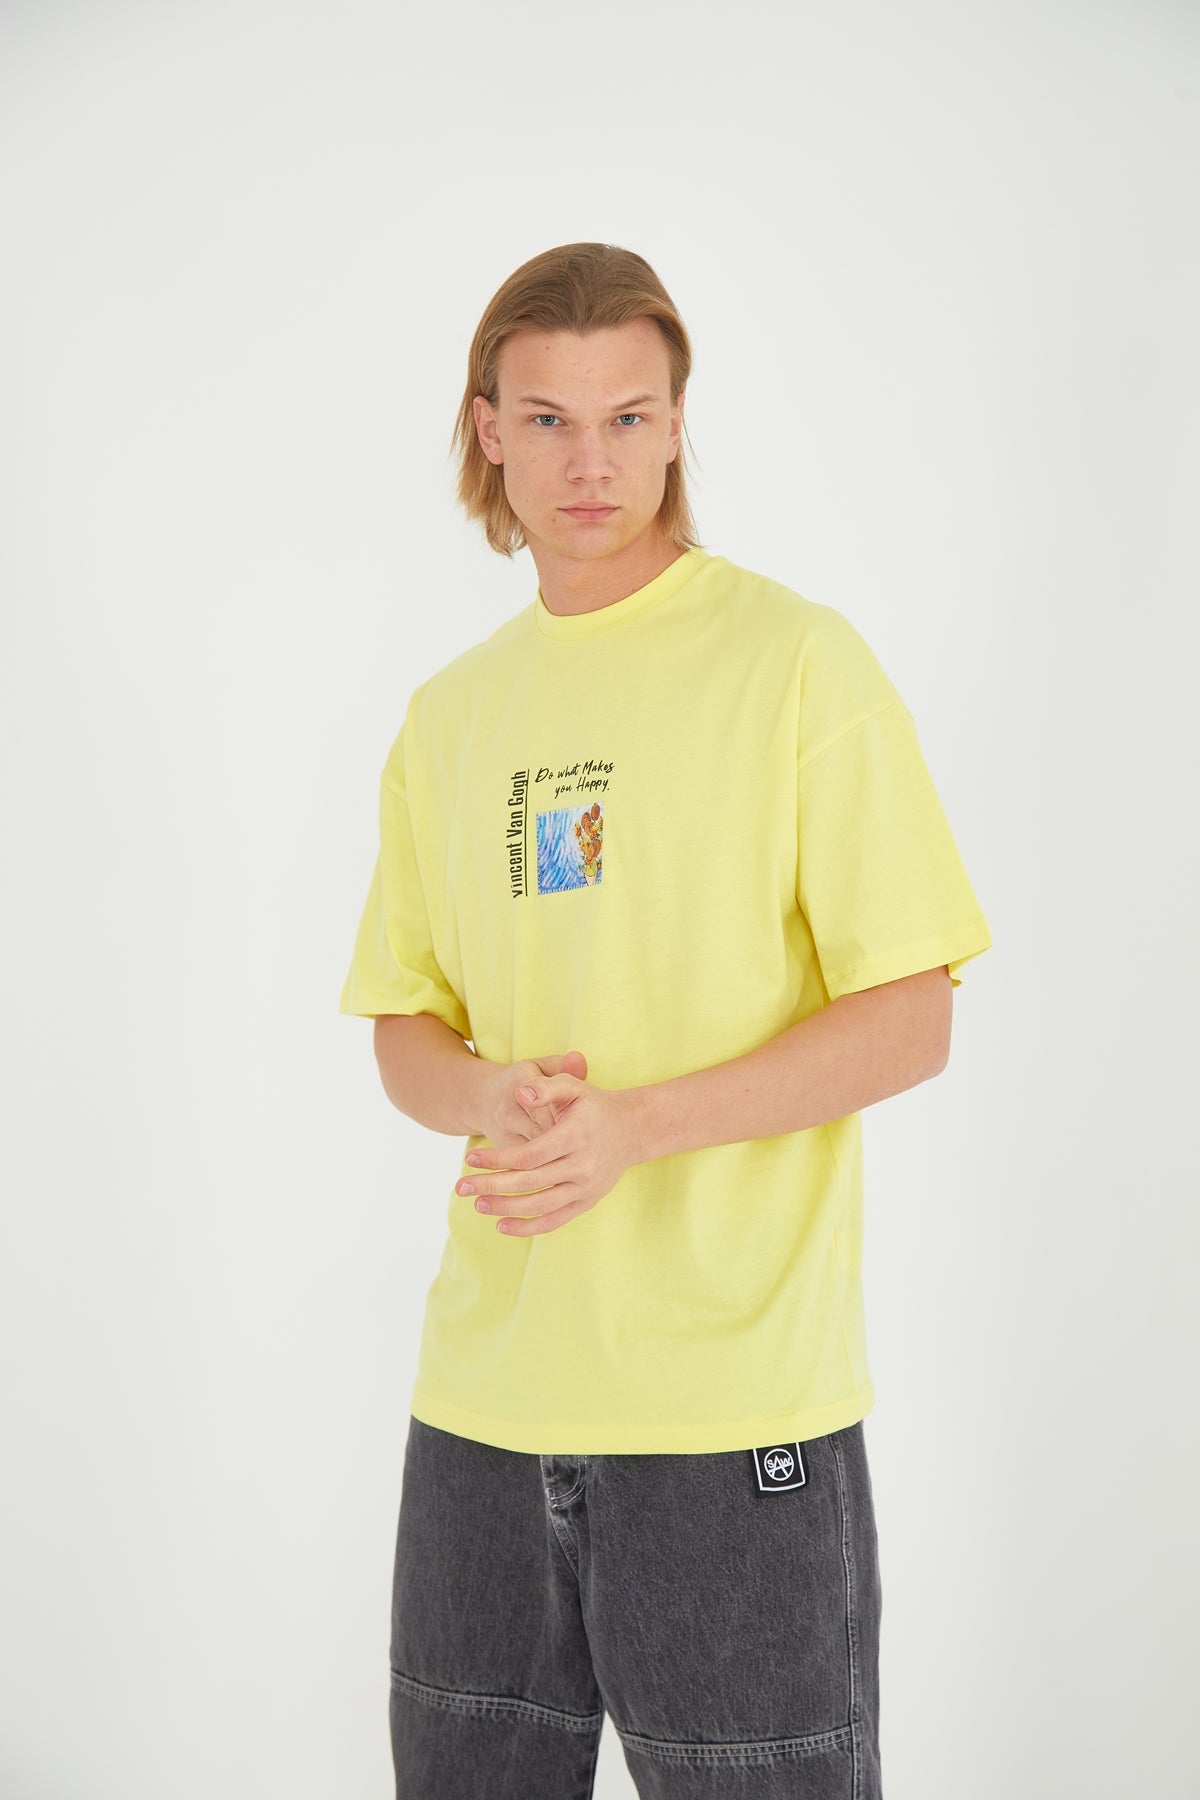 T-SHIRT - DO WHAT MAKES YOU HAPPY - YELLOW